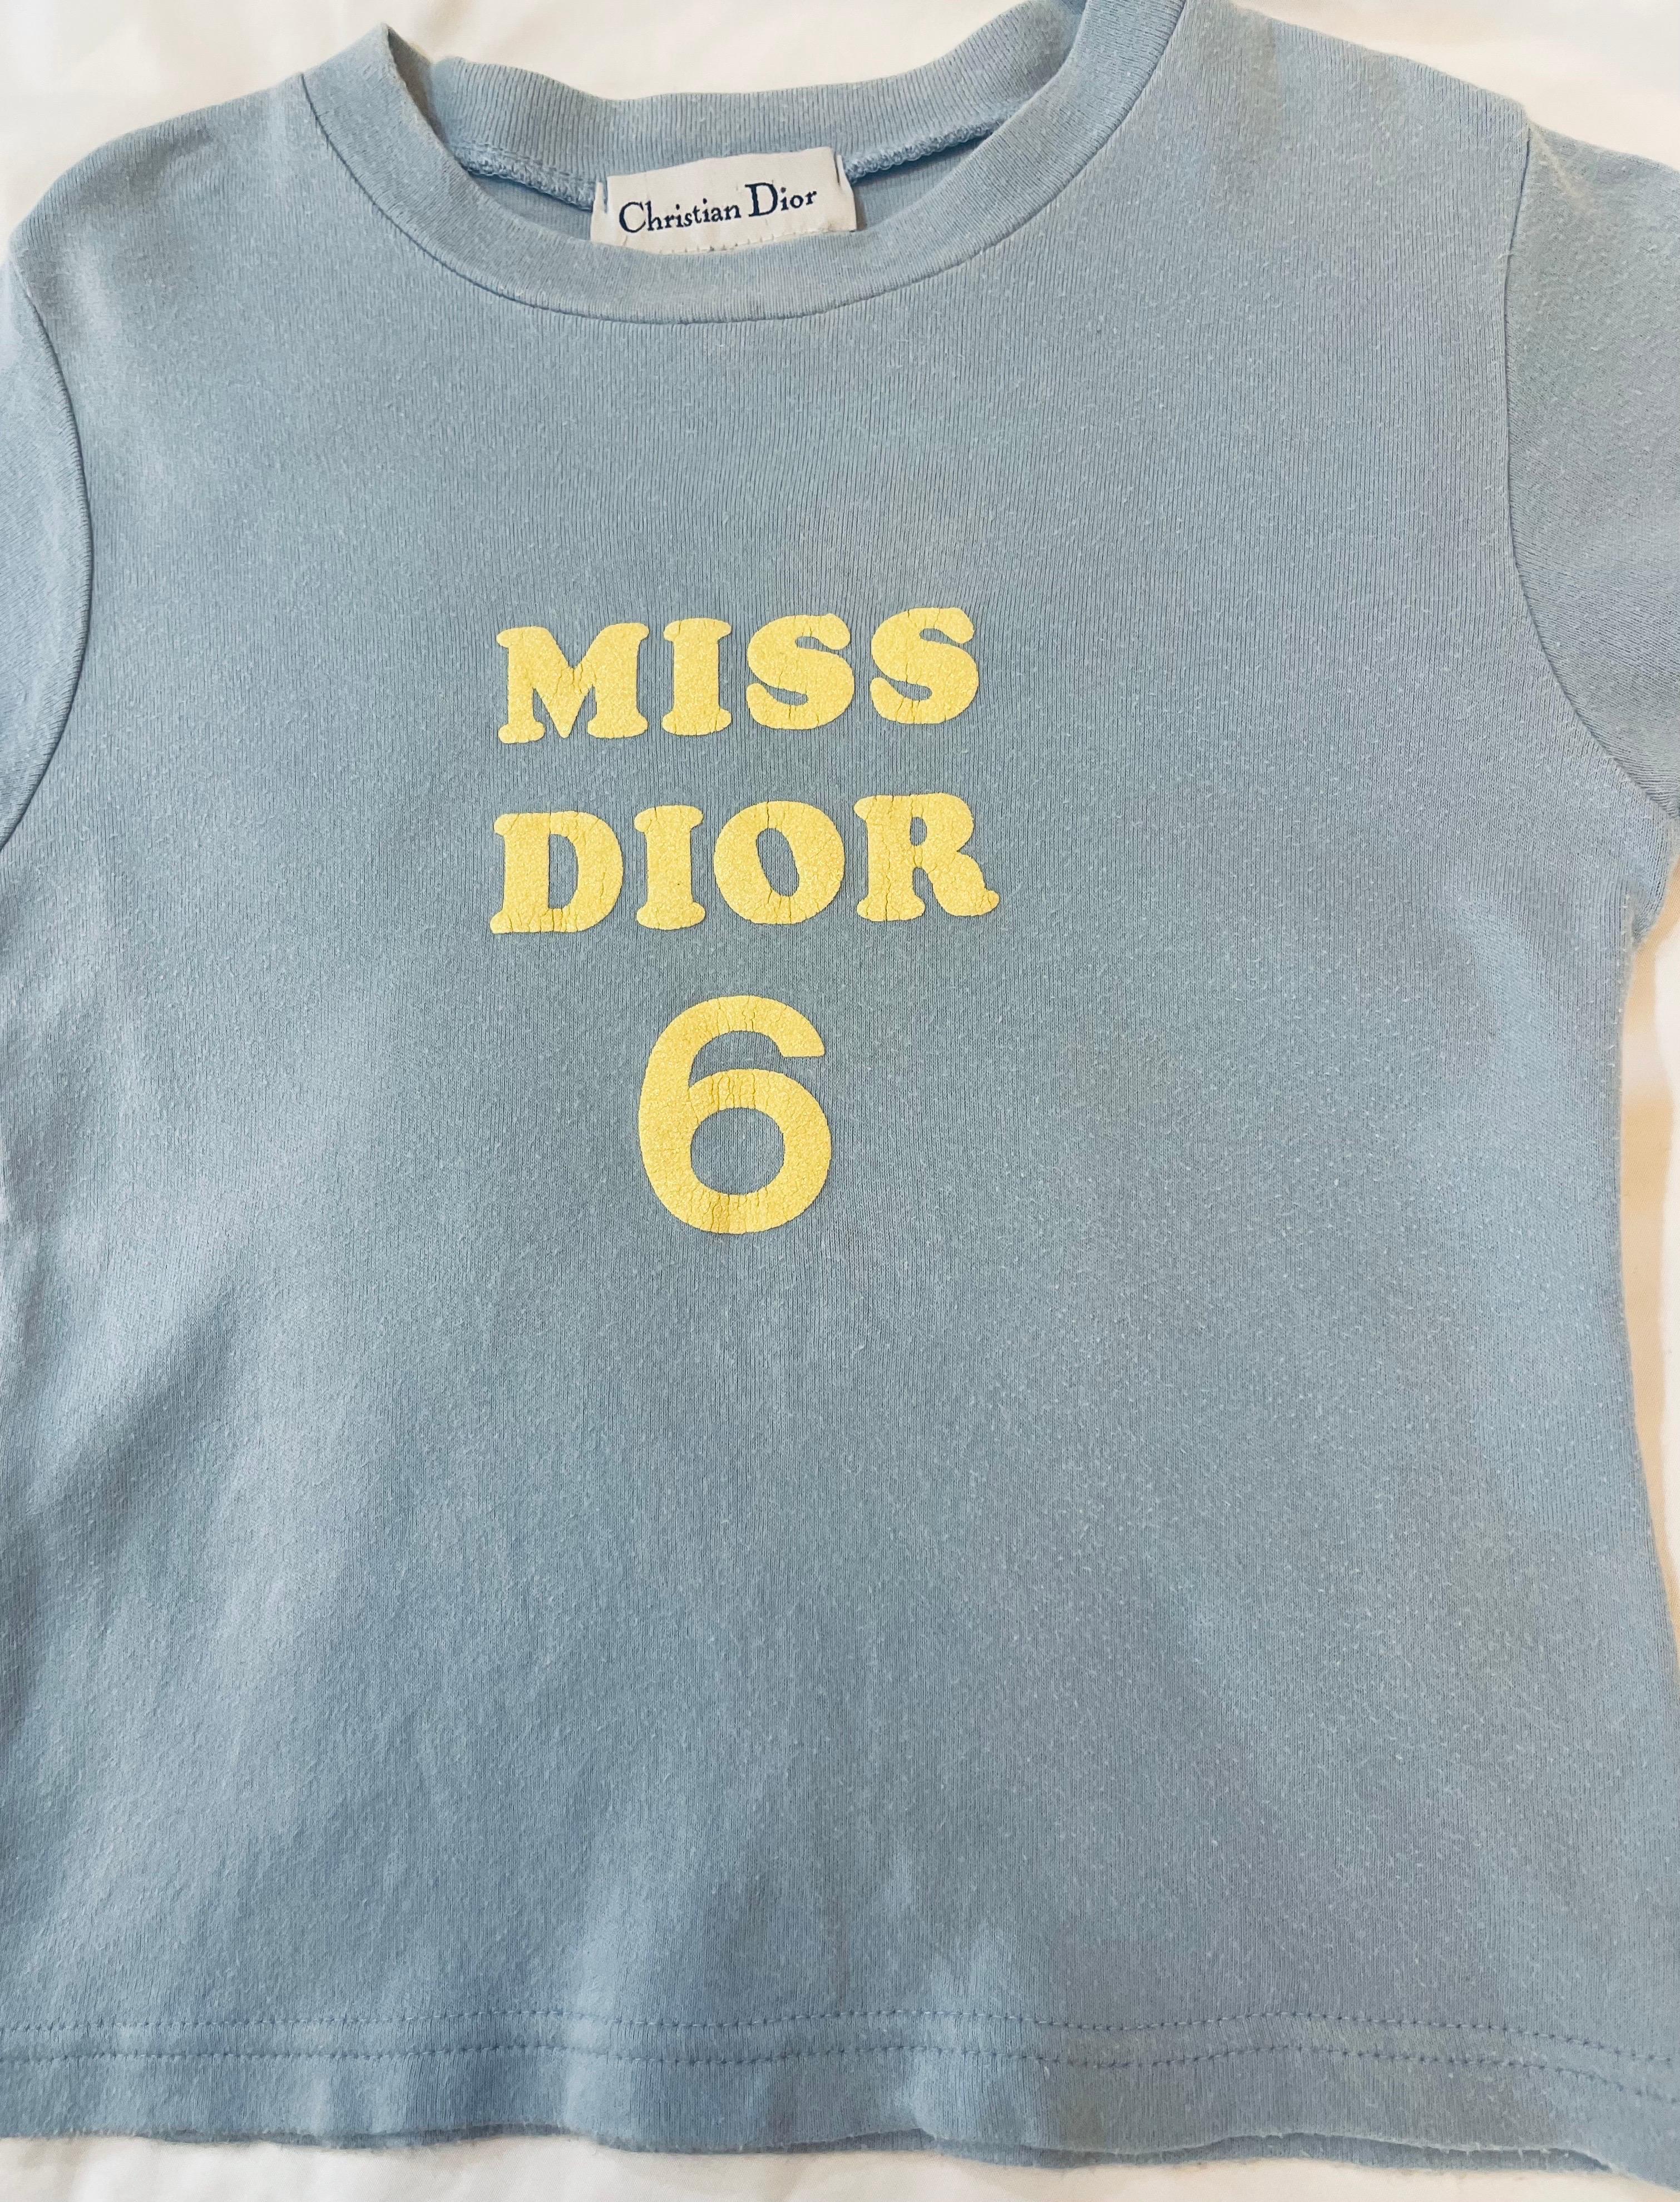 Super cool kid's vintage Christian Dior t-shirt with Miss Dior logo. Very rare item. Size 6-8Y.